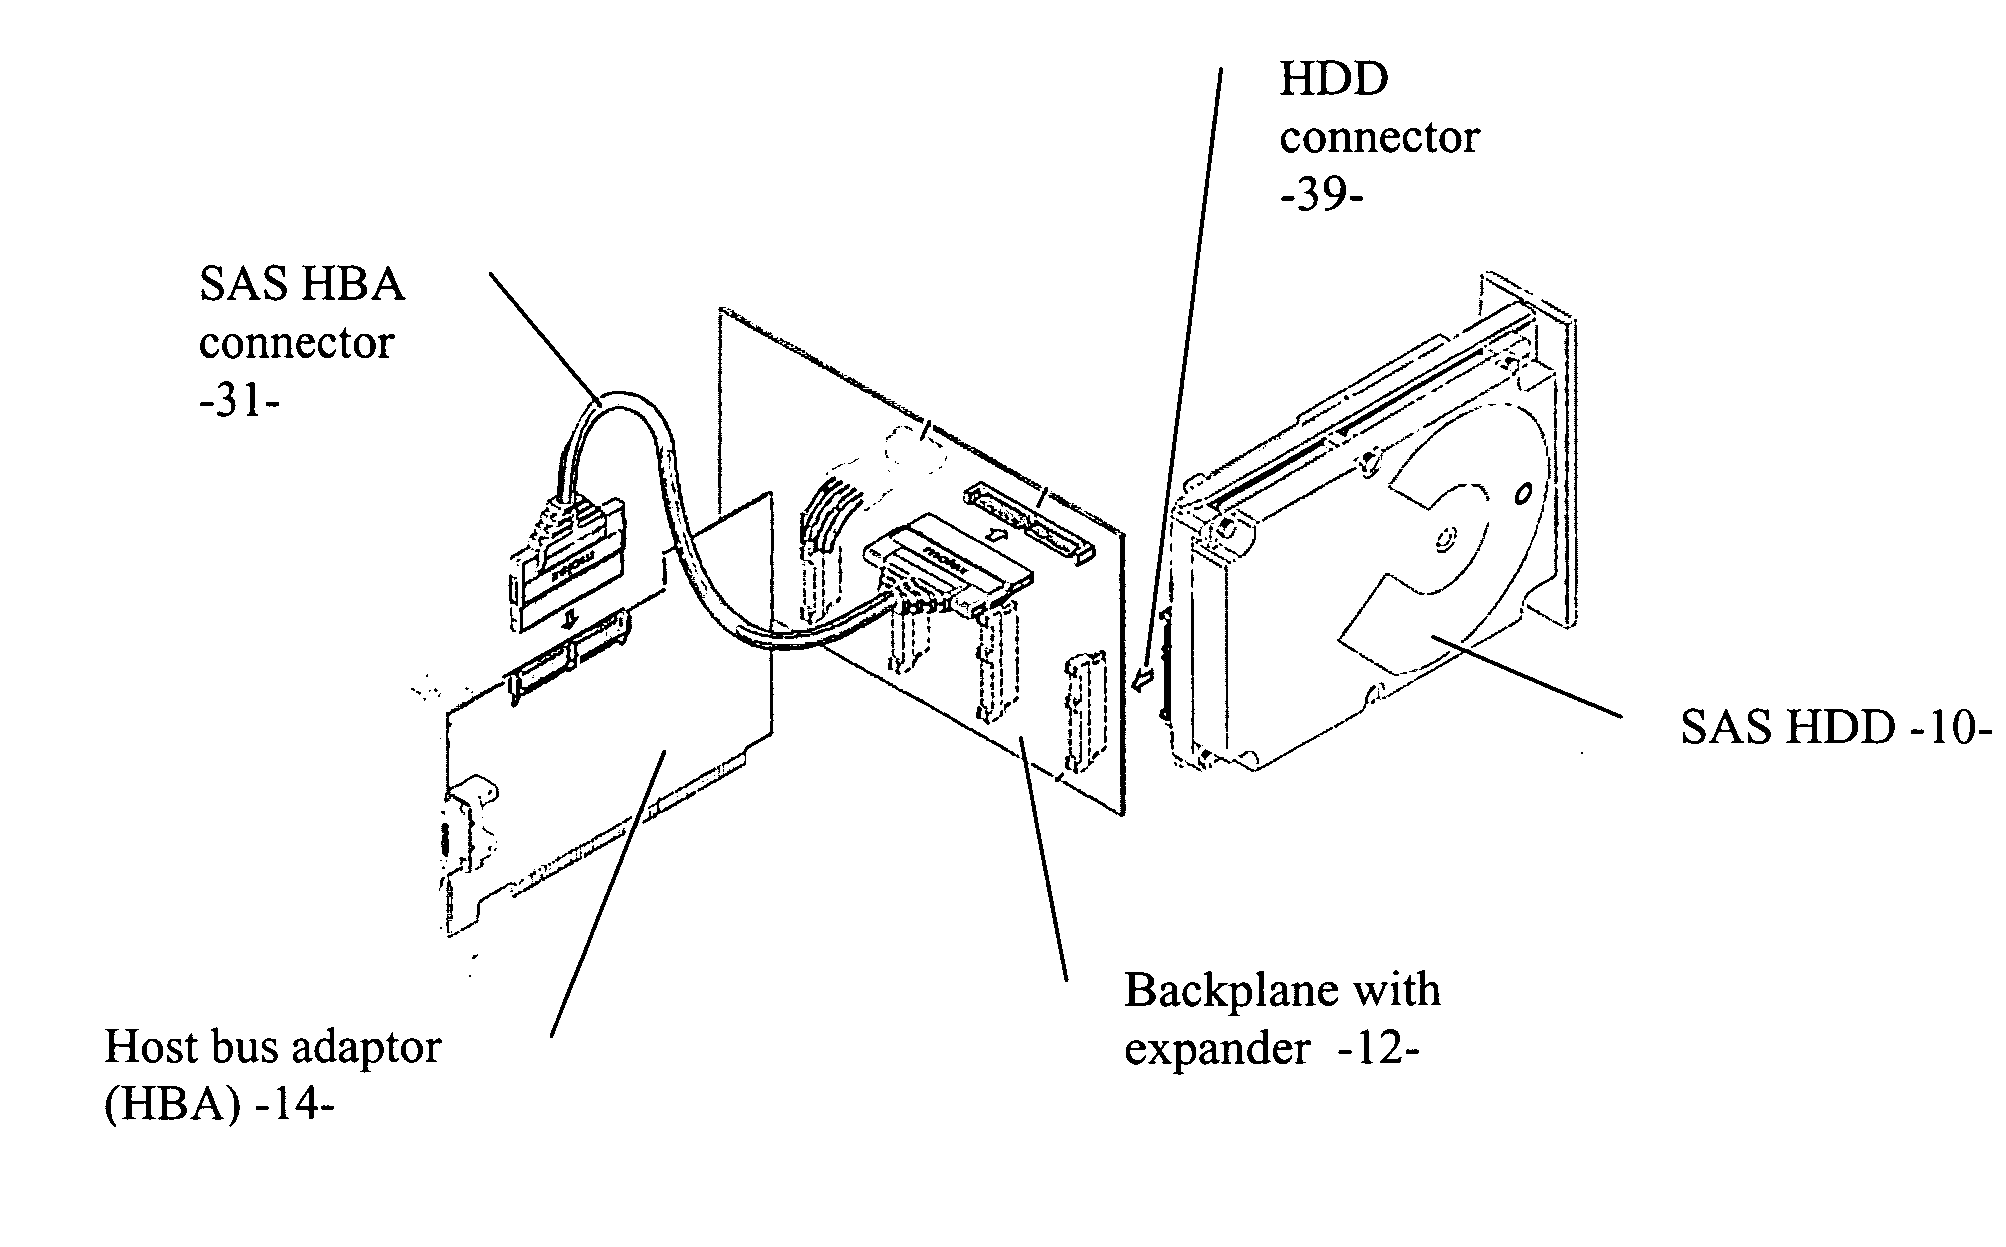 Universal backplane connection or computer storage chassis